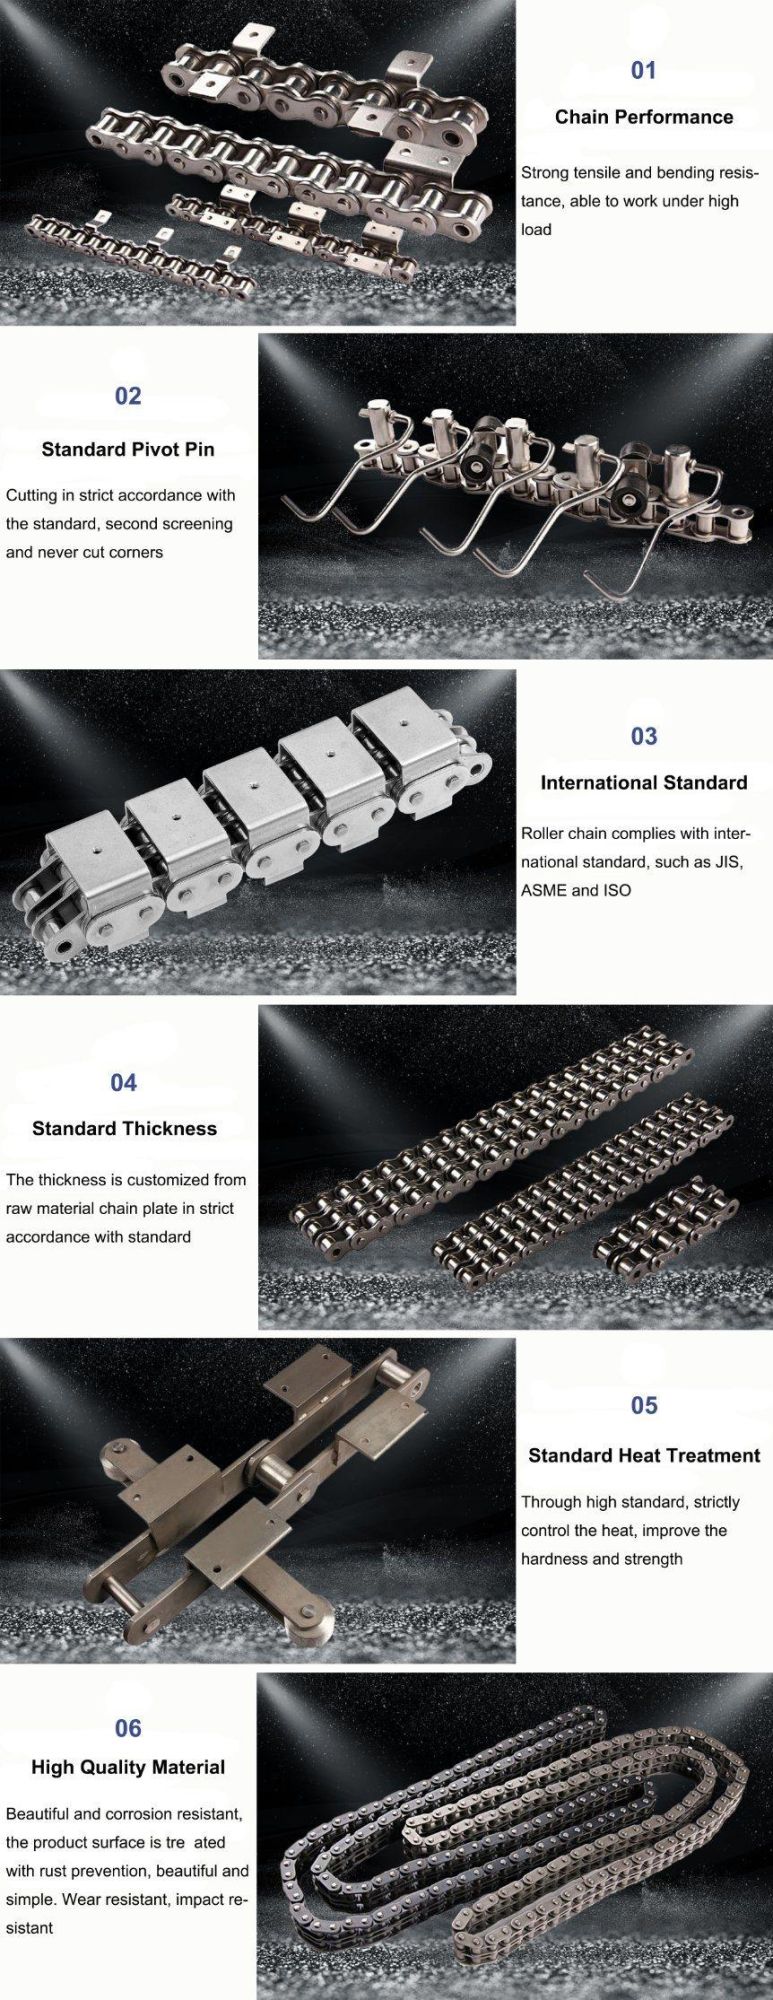 ISO Approved Roller Chain A1 A2 Attachment Transmission Welded Chains From China Manufacturer